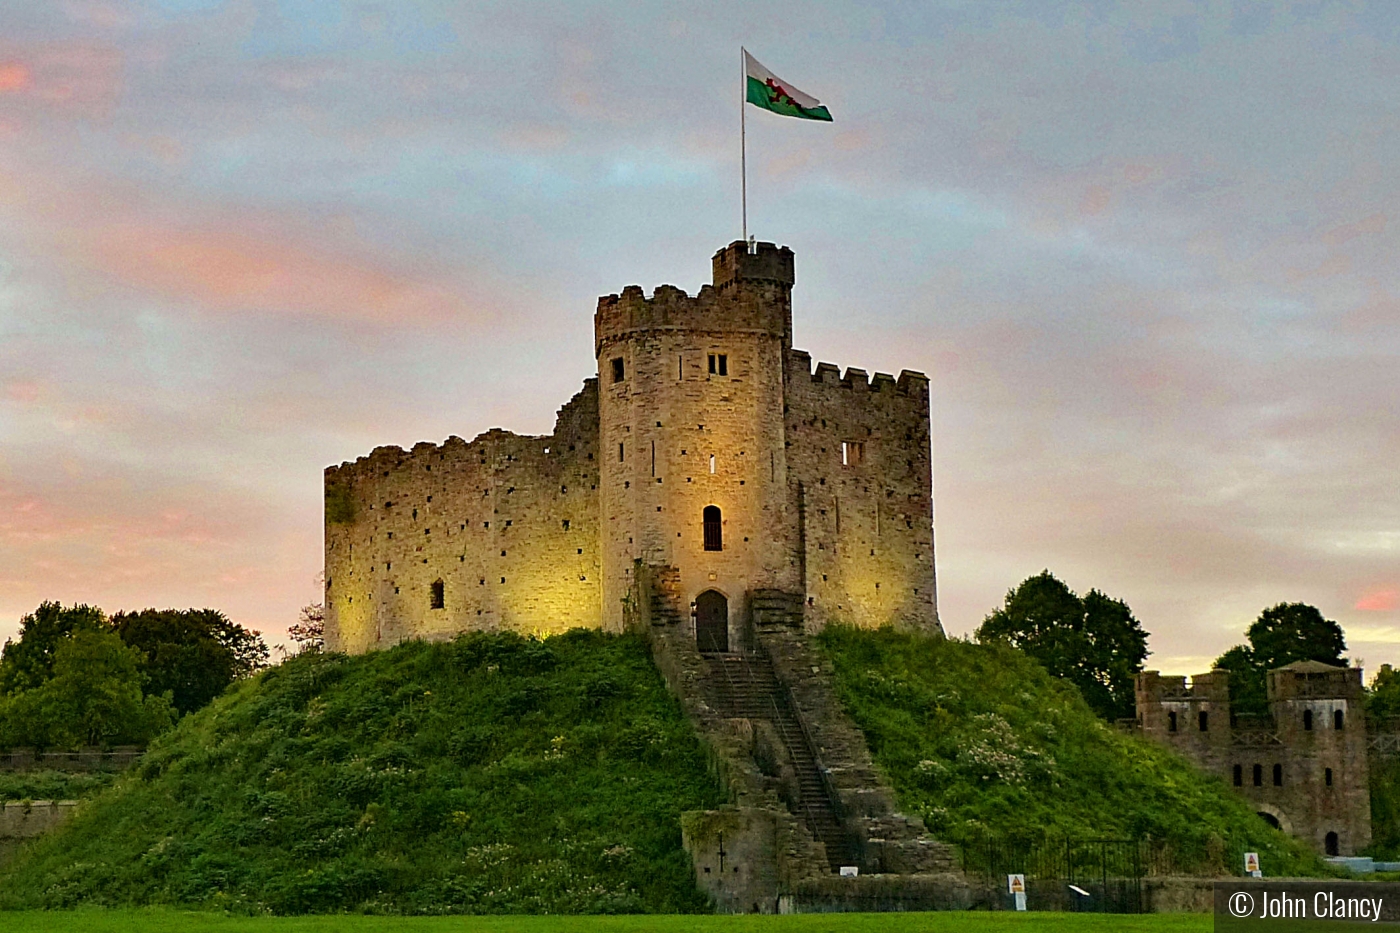 Cardiff castle at sunset by John Clancy